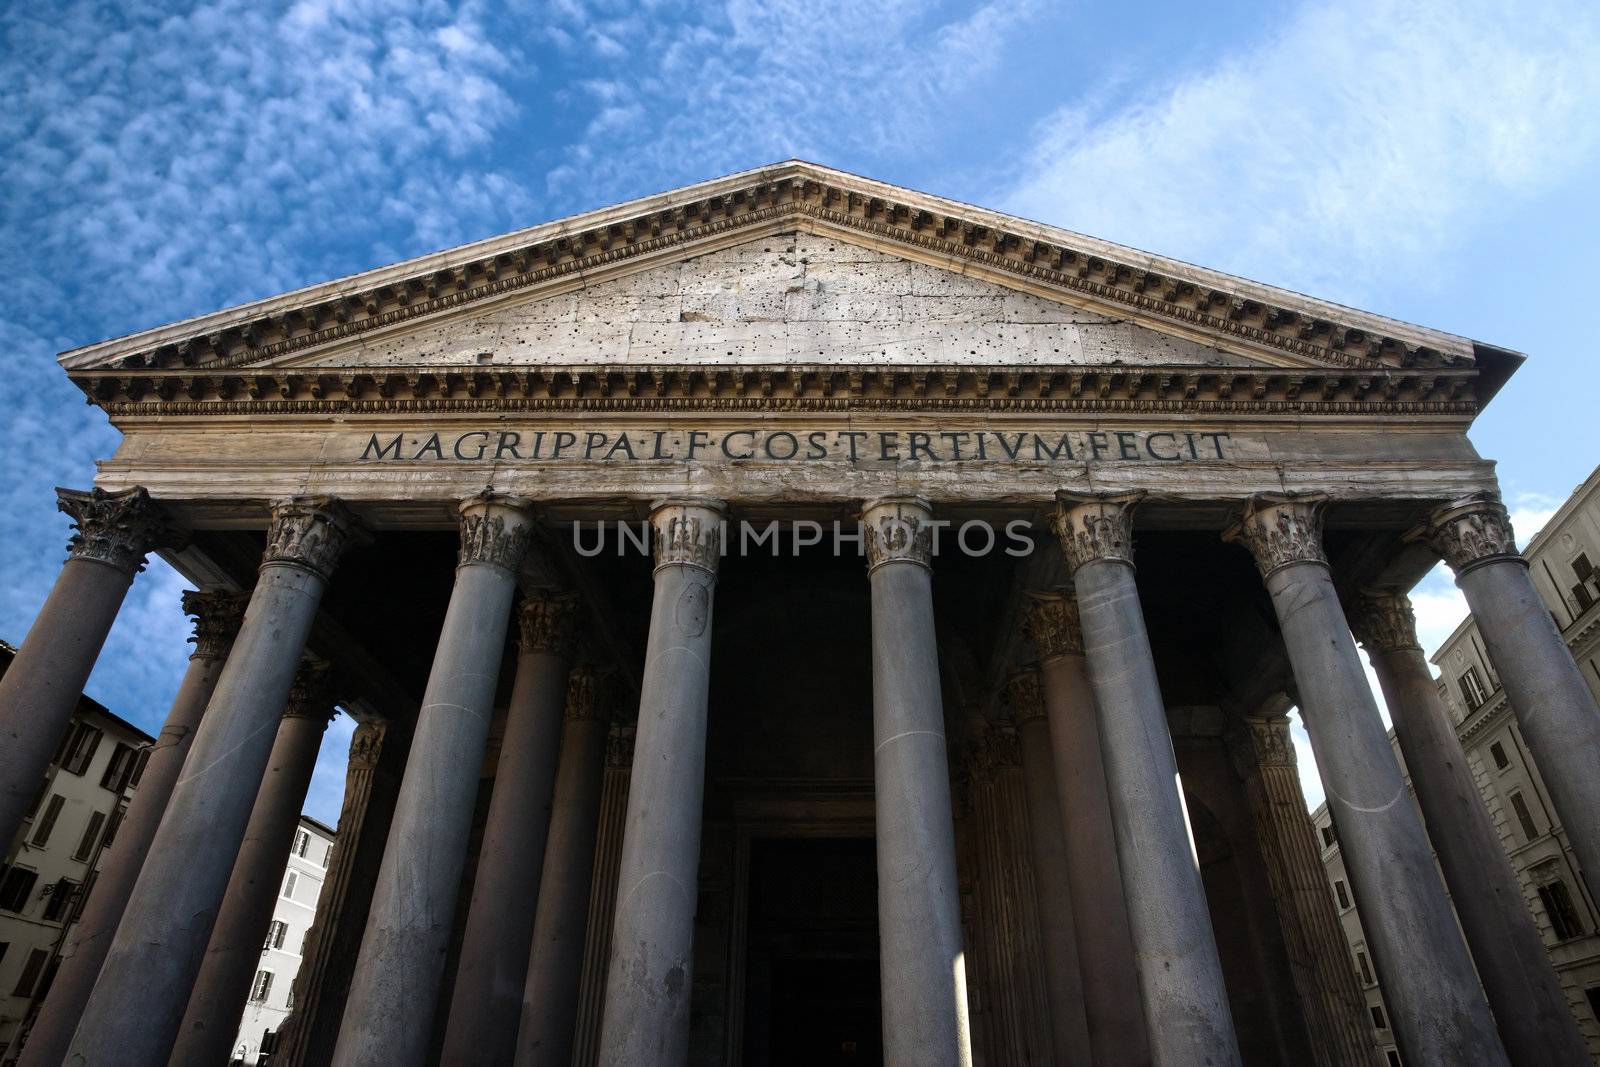 Image of the facade of the Pantheon in Rome, Italy. Shot with wide angle lens at a very low angle.
